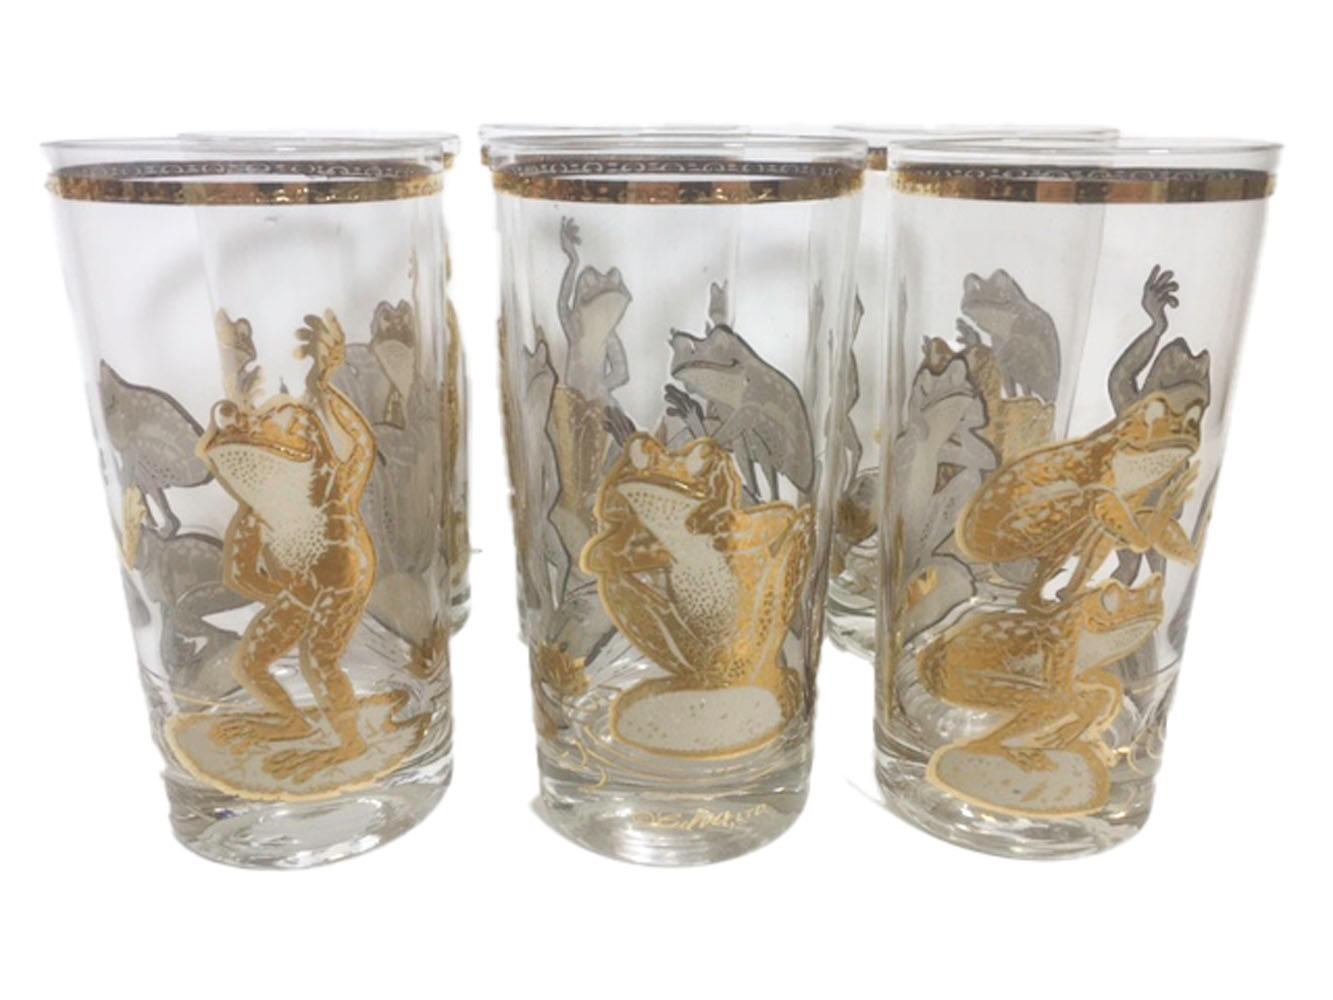 12 midcentury culver glassware cocktail glasses, 6 each highball and rocks glasses. Decorated in white enamel and 22 karat gold with frogs playing leap frog and dancing.

6 - Highball glasses: 5-1/2